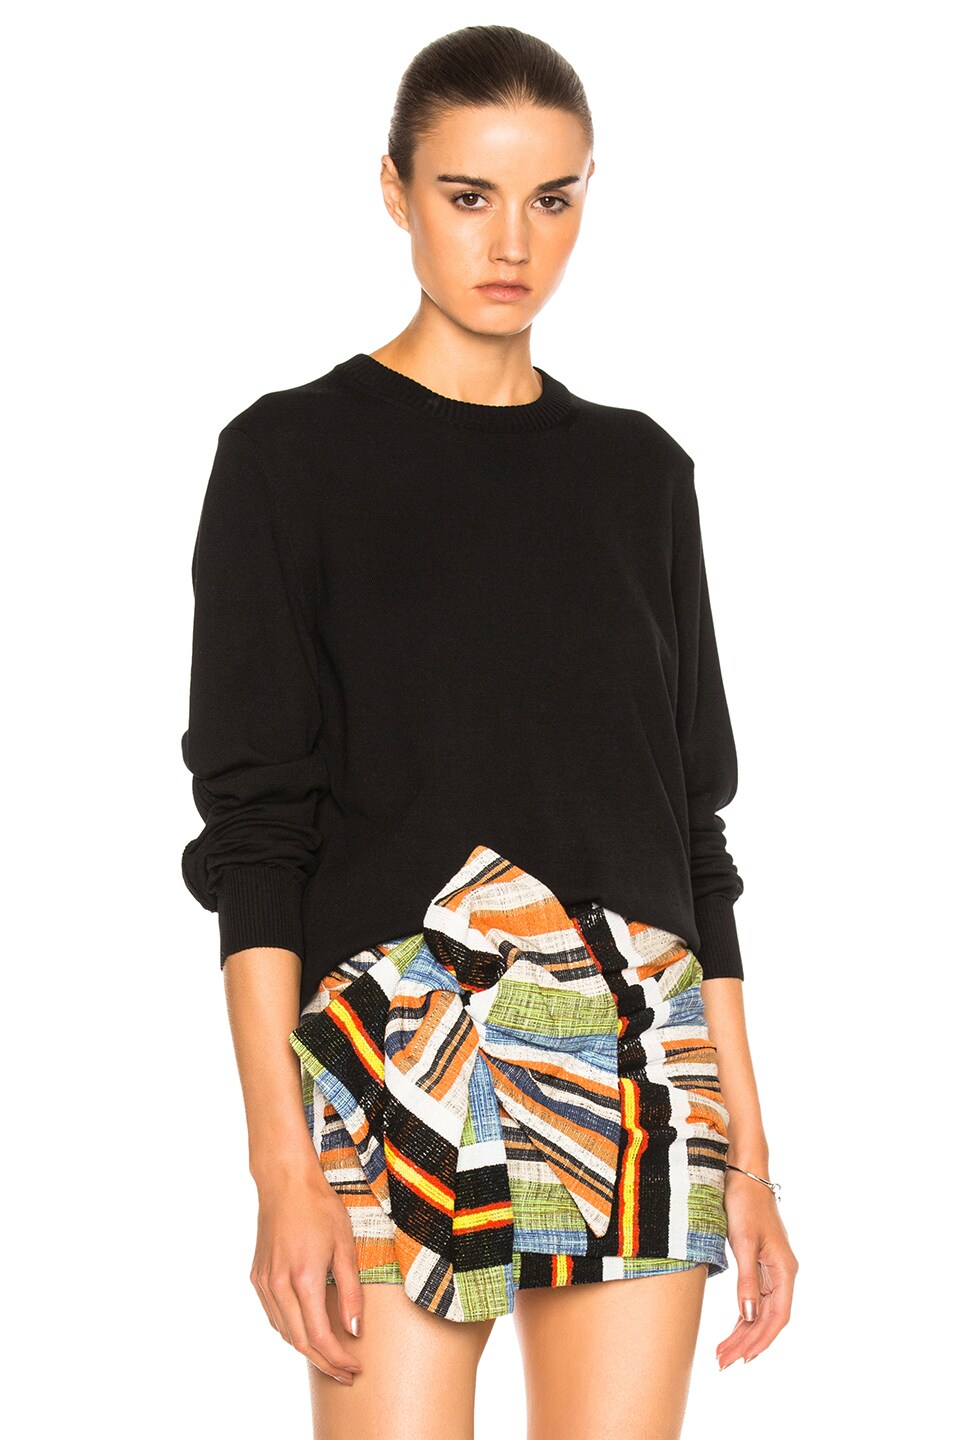 Image 1 of Maison Margiela Pullover Sweater in Black